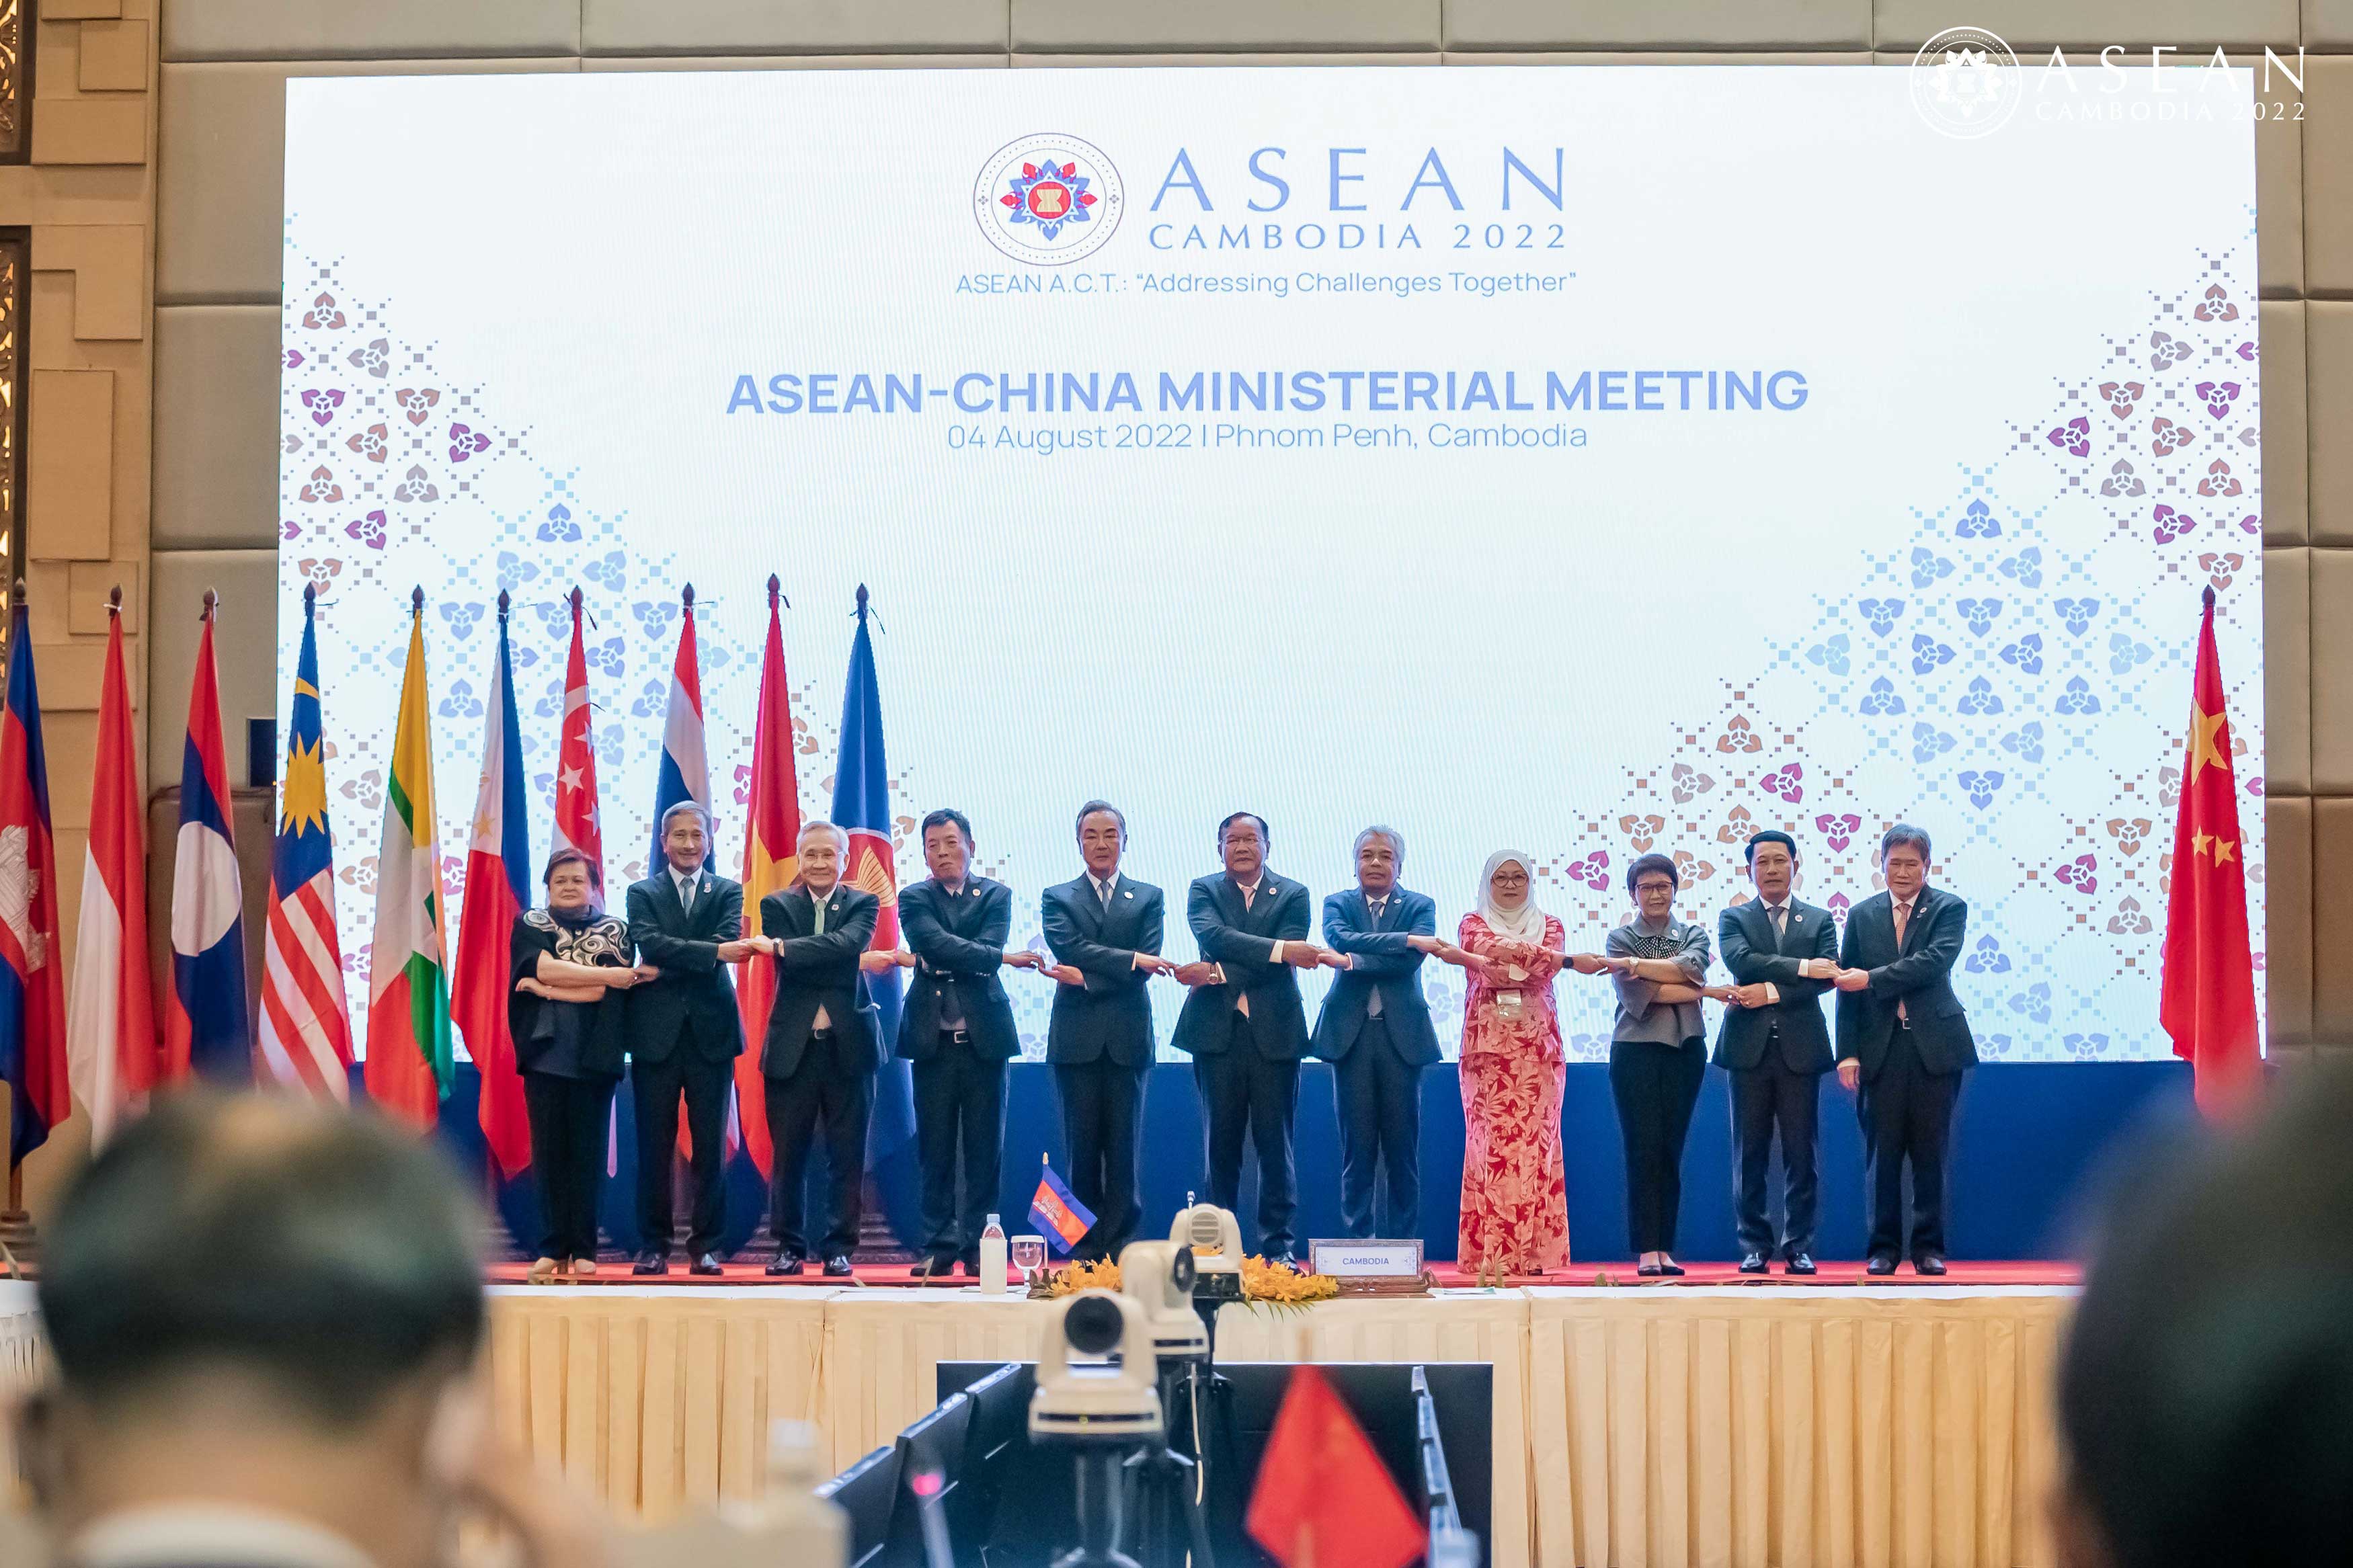 The ASEANChina Ministerial Meeting ( 04 August 2022 ) Ministry of